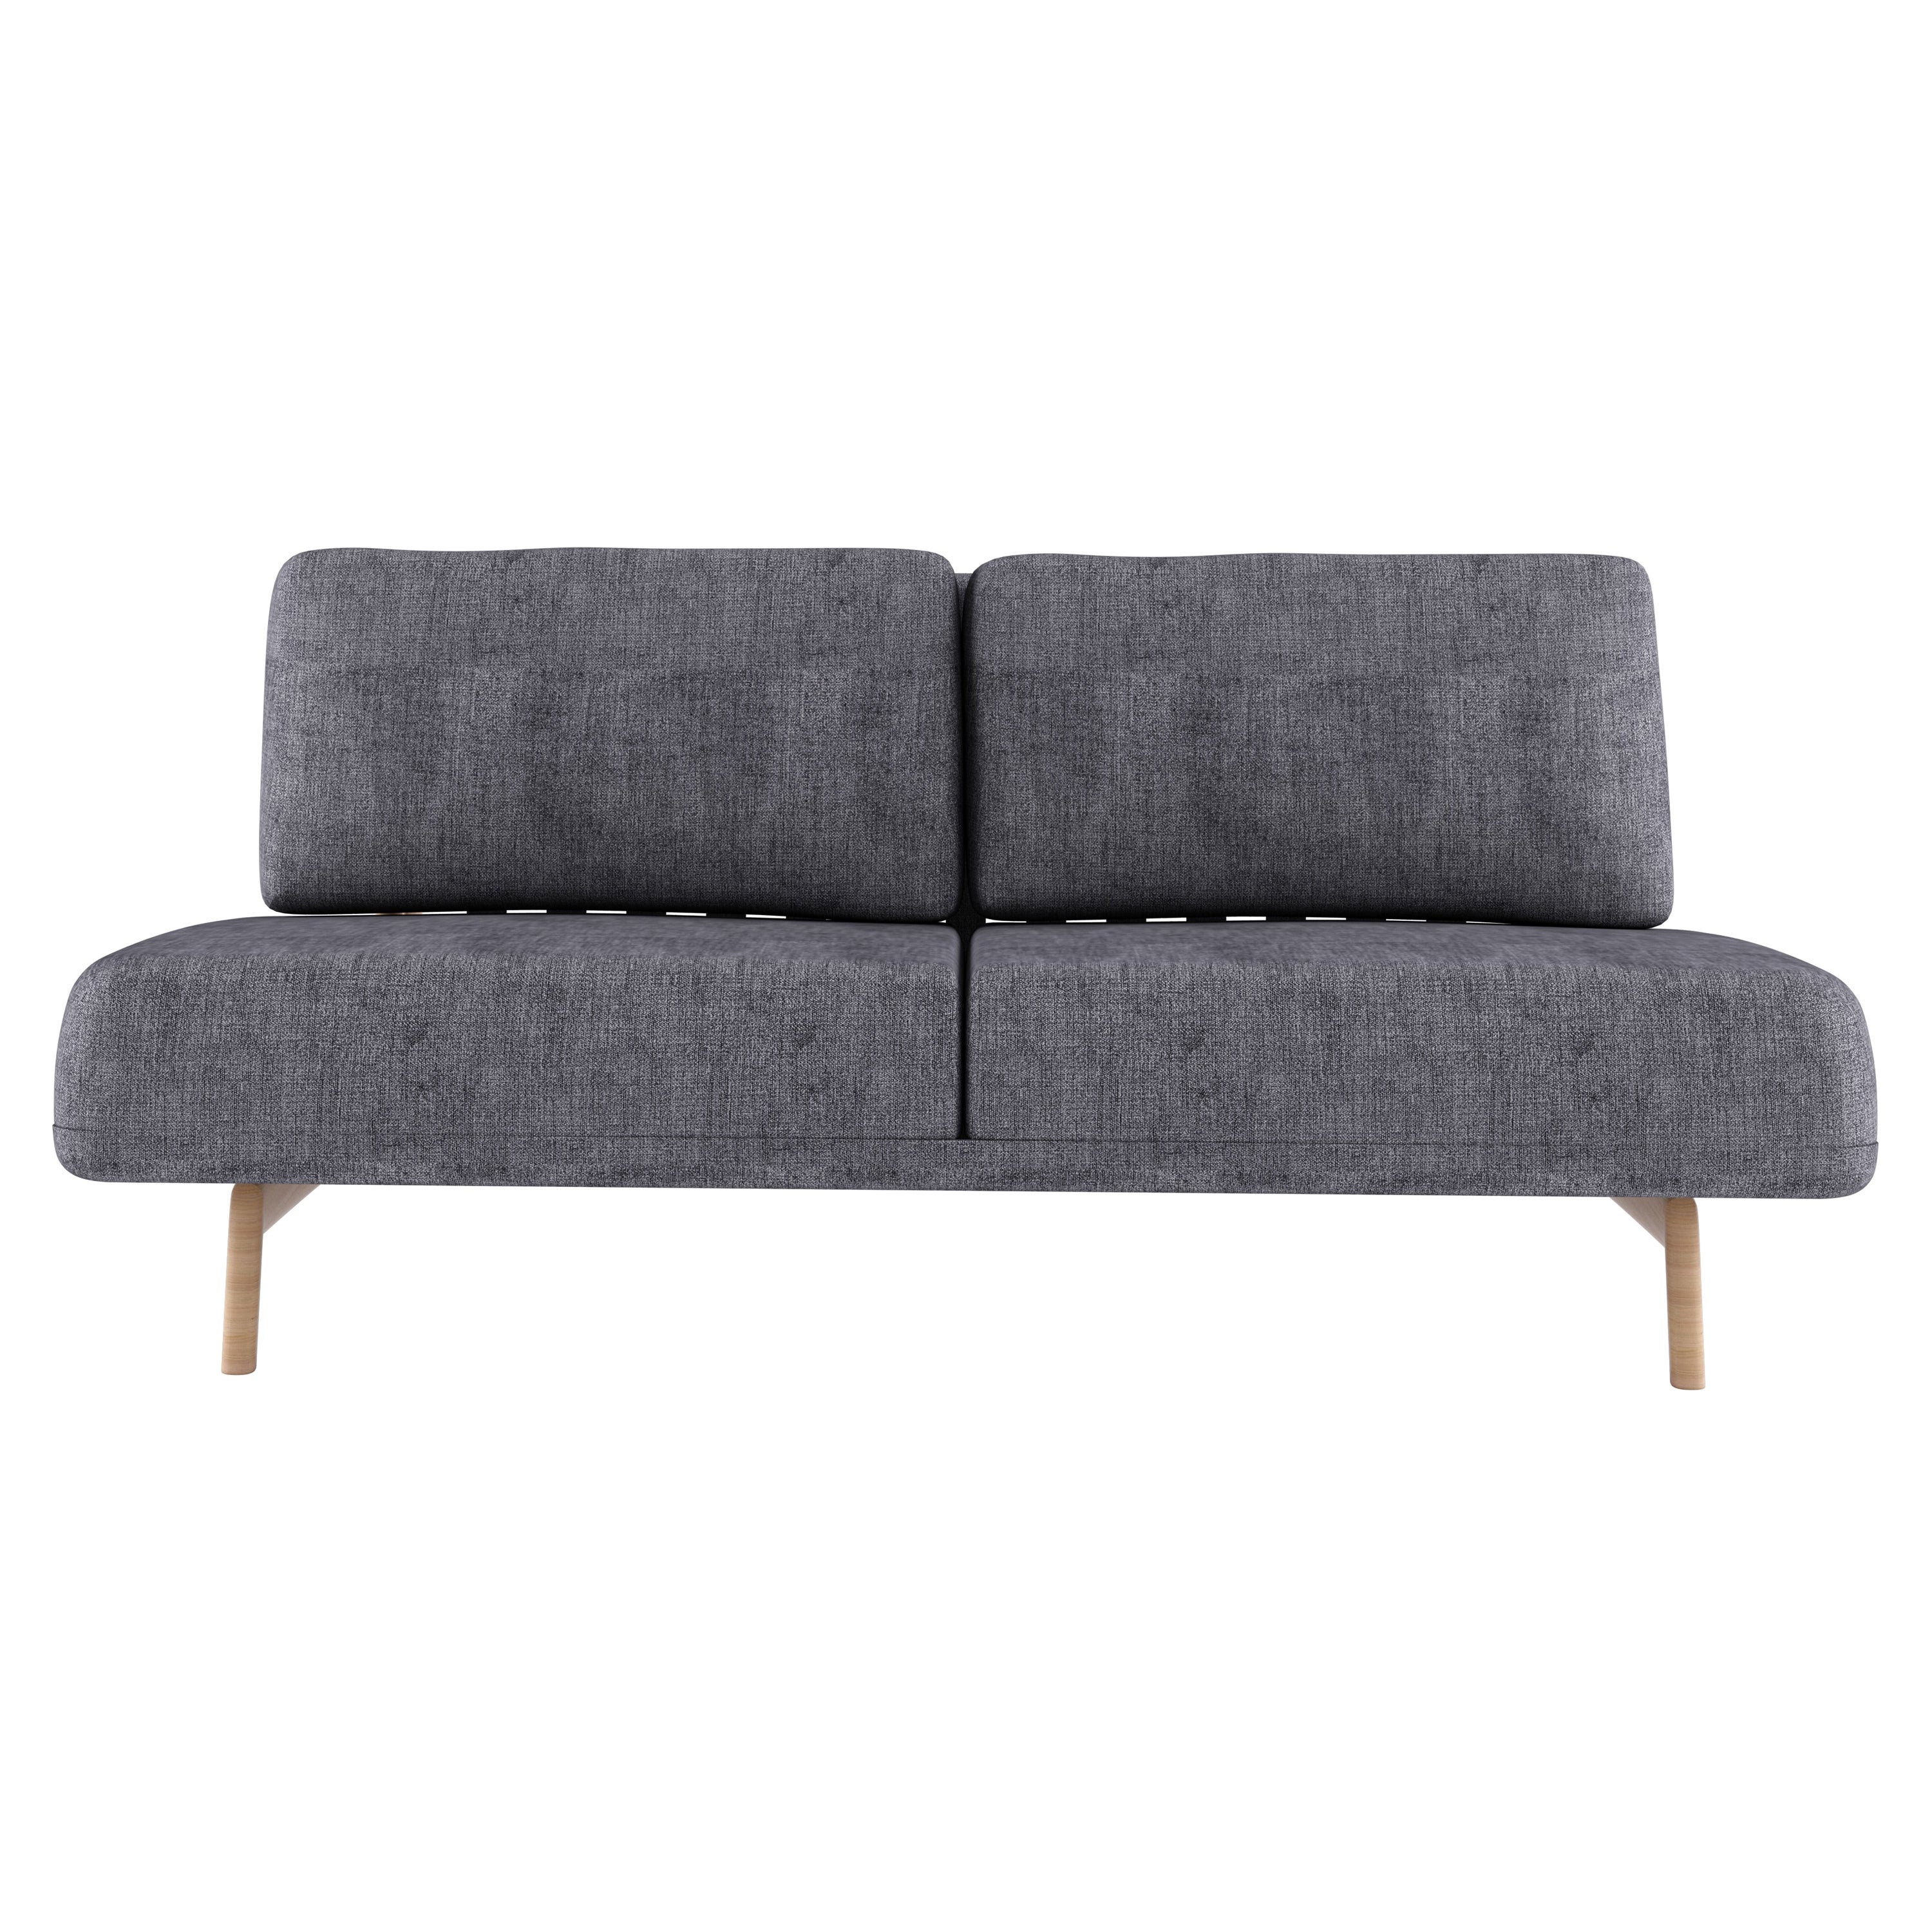 Alias D20 Trigono Two Seater Sofa in Grey Upholstery with Natural Oak Frame